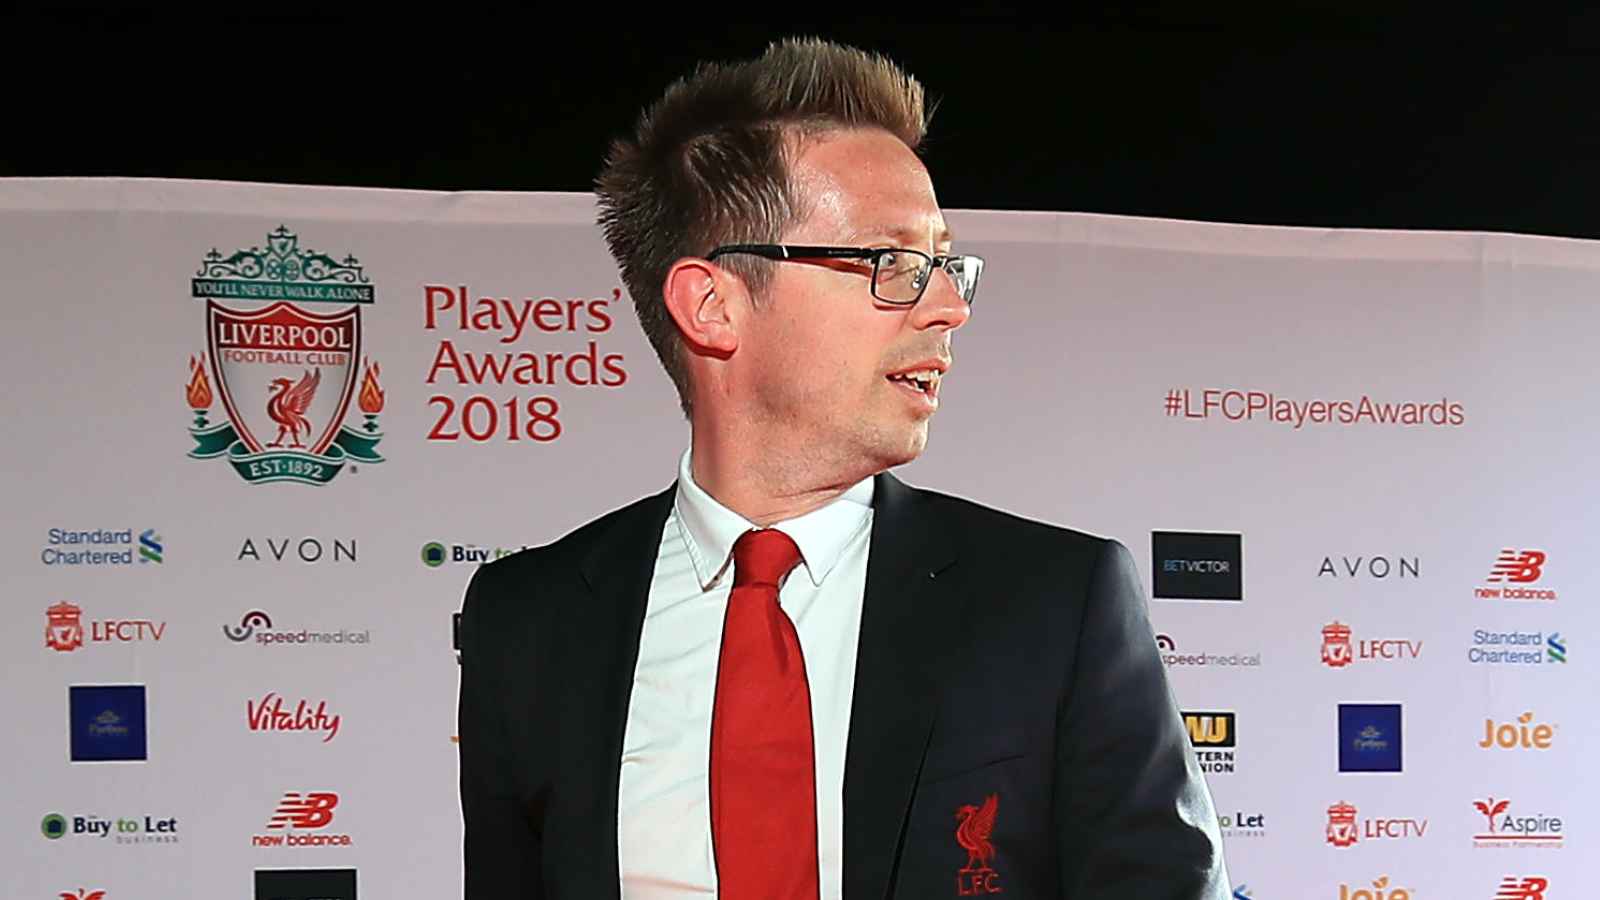 Michael Edwards arriving for a Liverpool awards ceremony in 2018